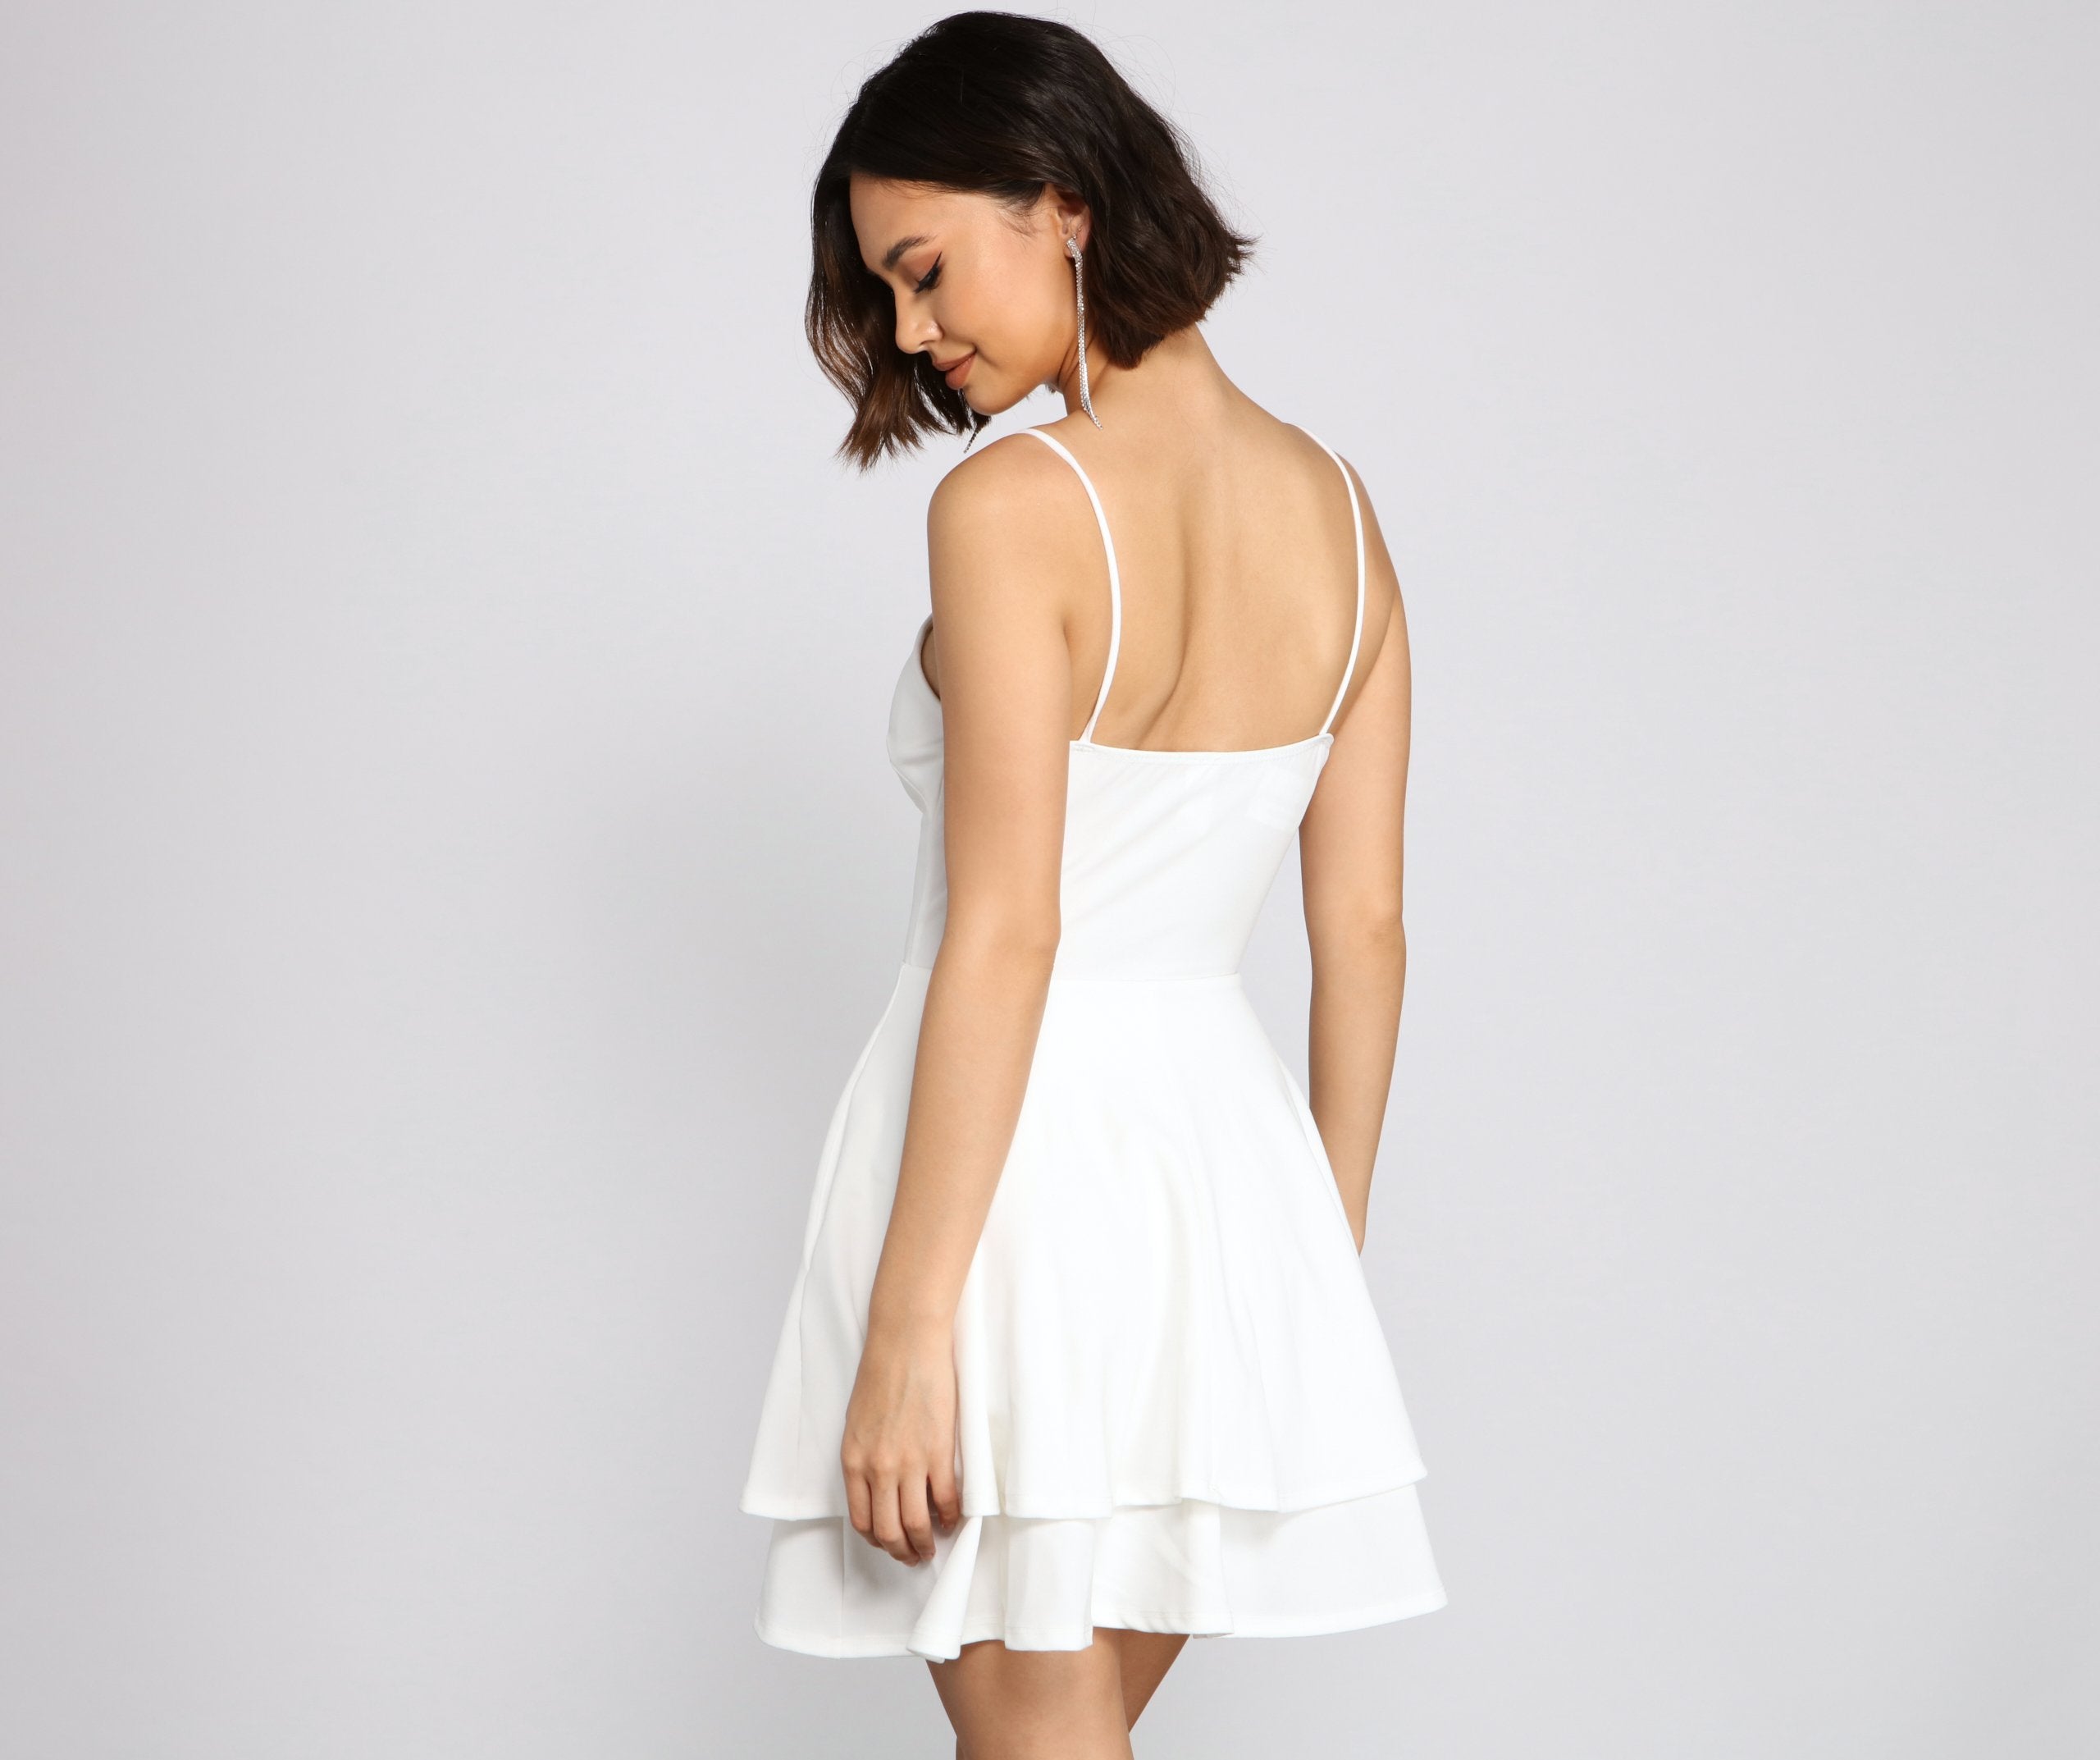 Simply Adorable Layered Skater Dresses